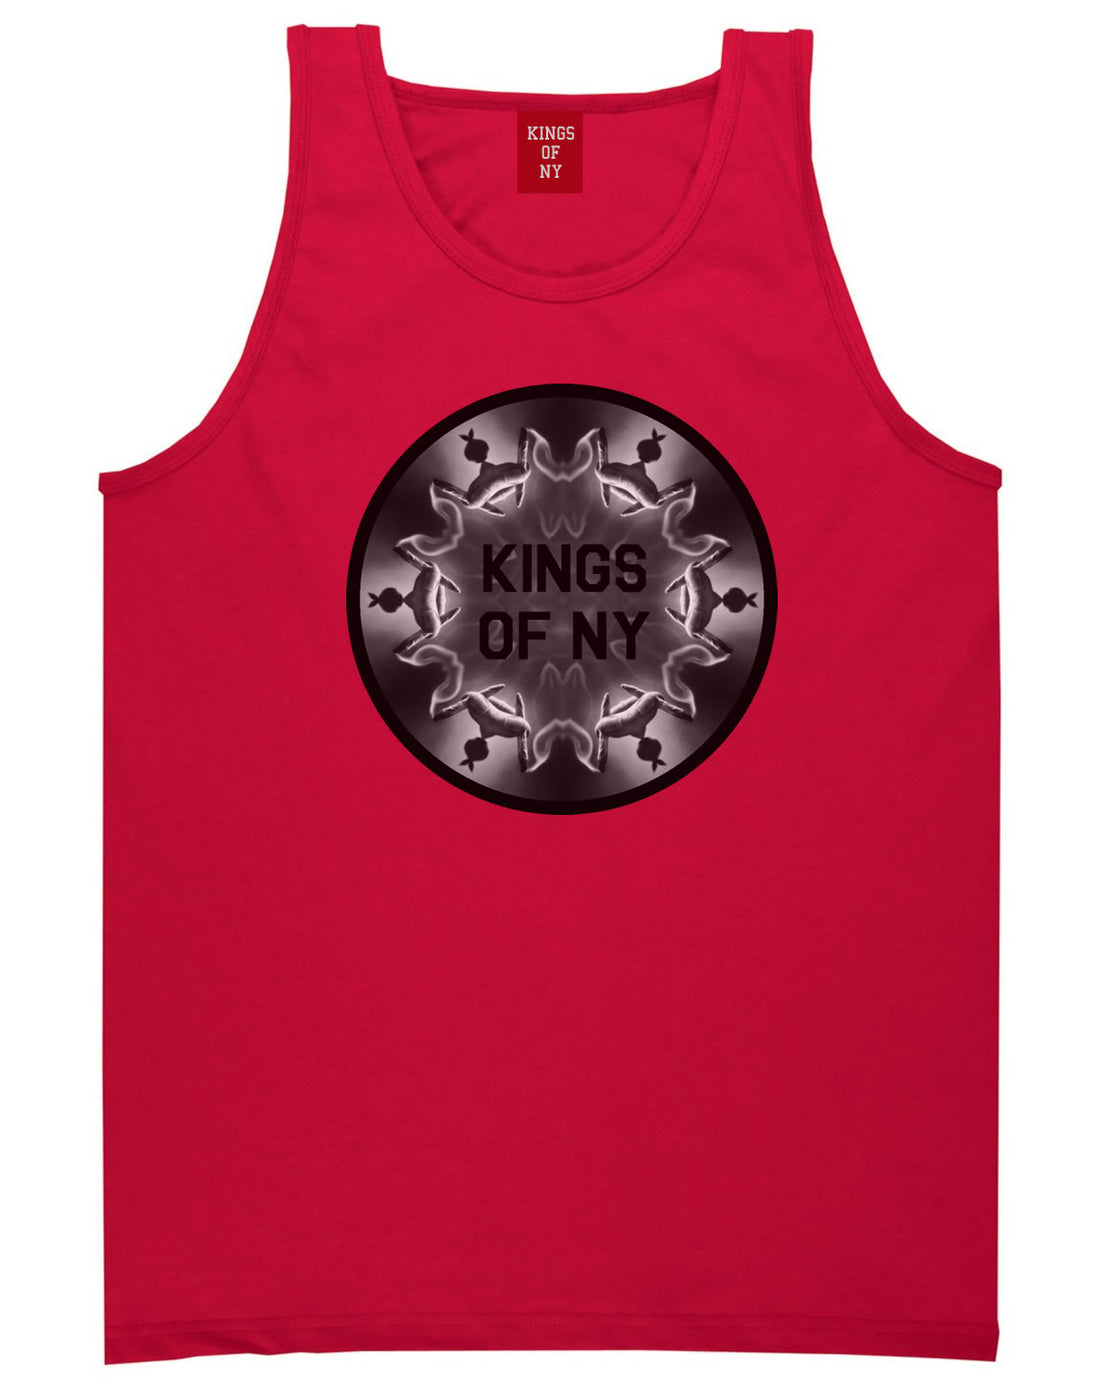 Pass That Blunt Tank Top in Red By Kings Of NY